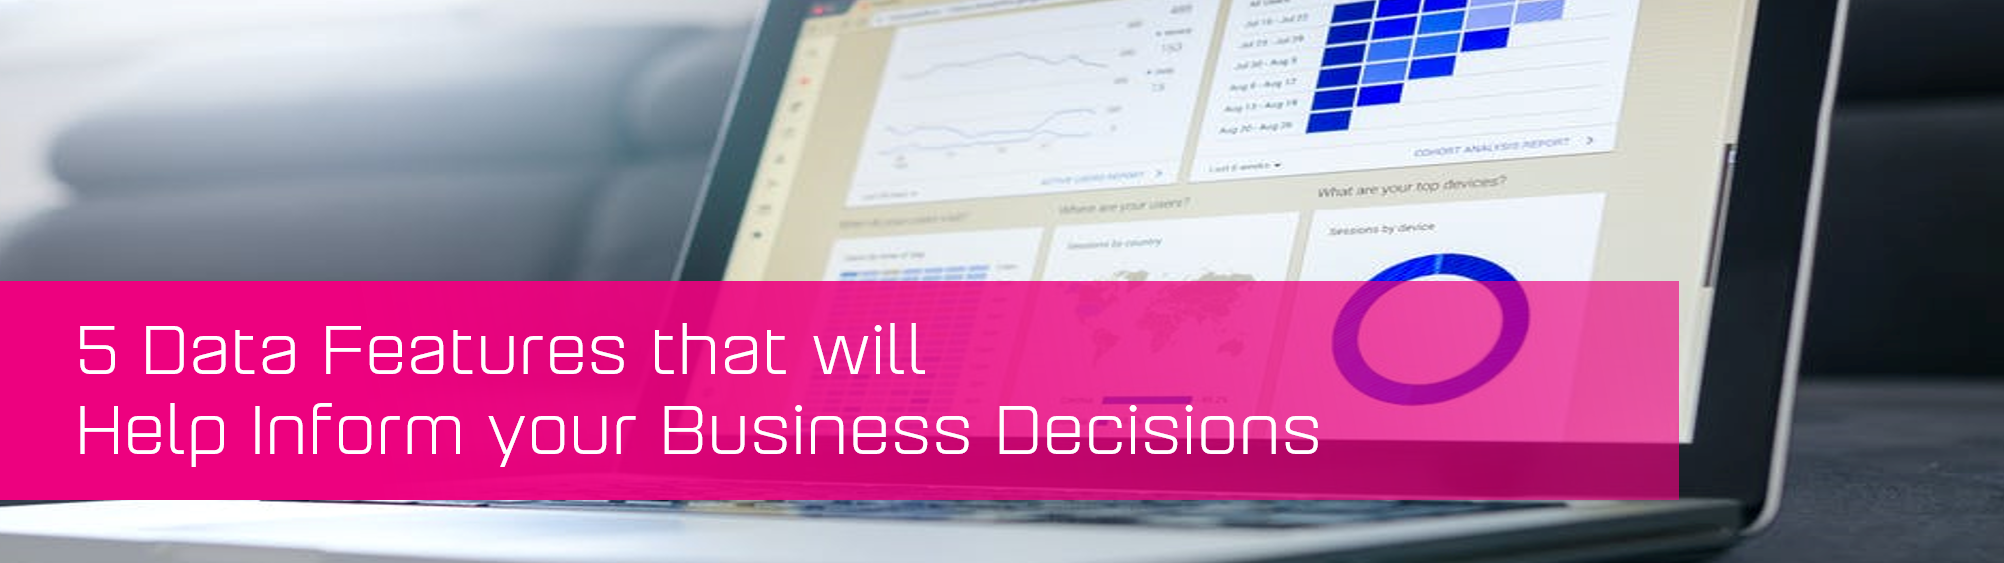 KCS SA - Blog - 5 Data features for business decisions banner